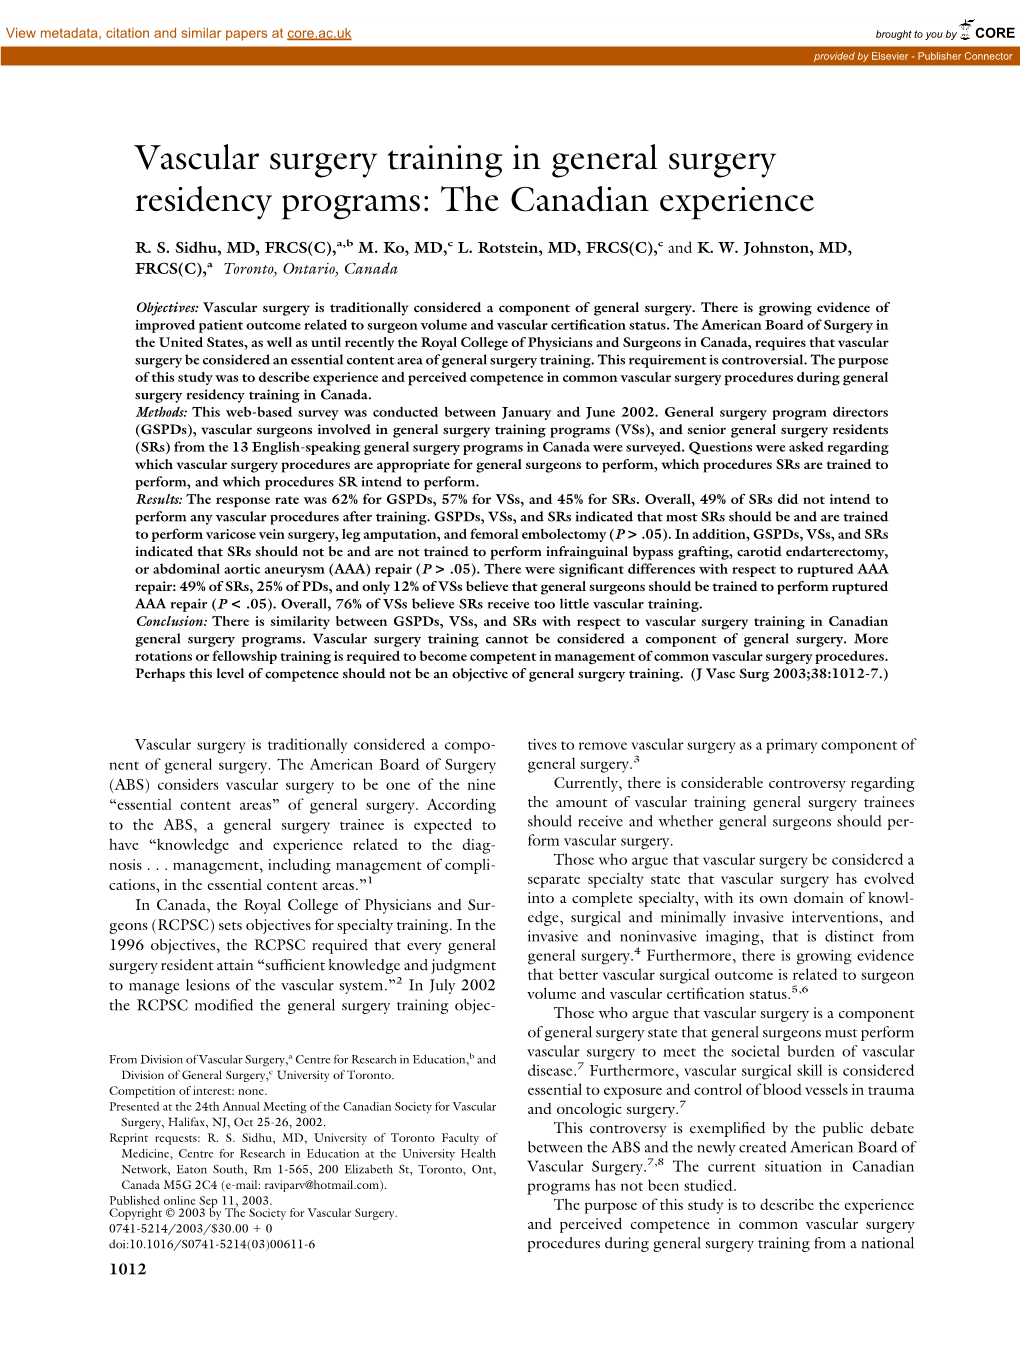 Vascular Surgery Training in General Surgery Residency Programs: the Canadian Experience